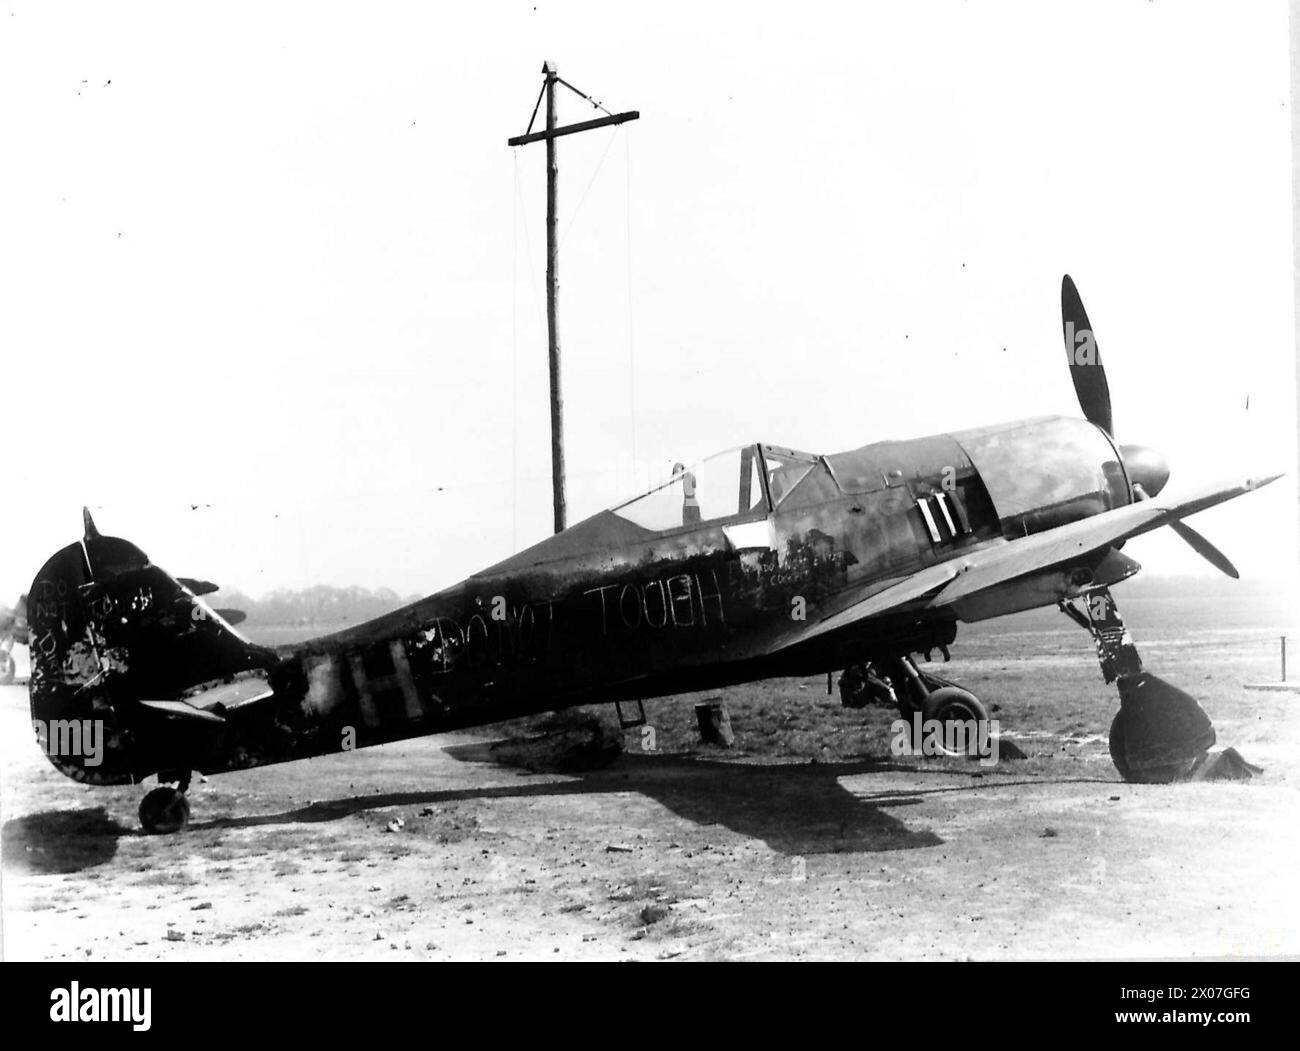 THE ROYAL AIR FORCE IN BRITAIN 1940-1945 - Original wartime caption: During the night of the 16th July 1943 when a small force of German FW.190 fighter-bombers attempted to attack London, one of the raiders landed at an R.A.F. airfield. The Fw.190 which landed at West Mailing, R.A.F. Station. Photographic negative , Royal Air Force Stock Photo